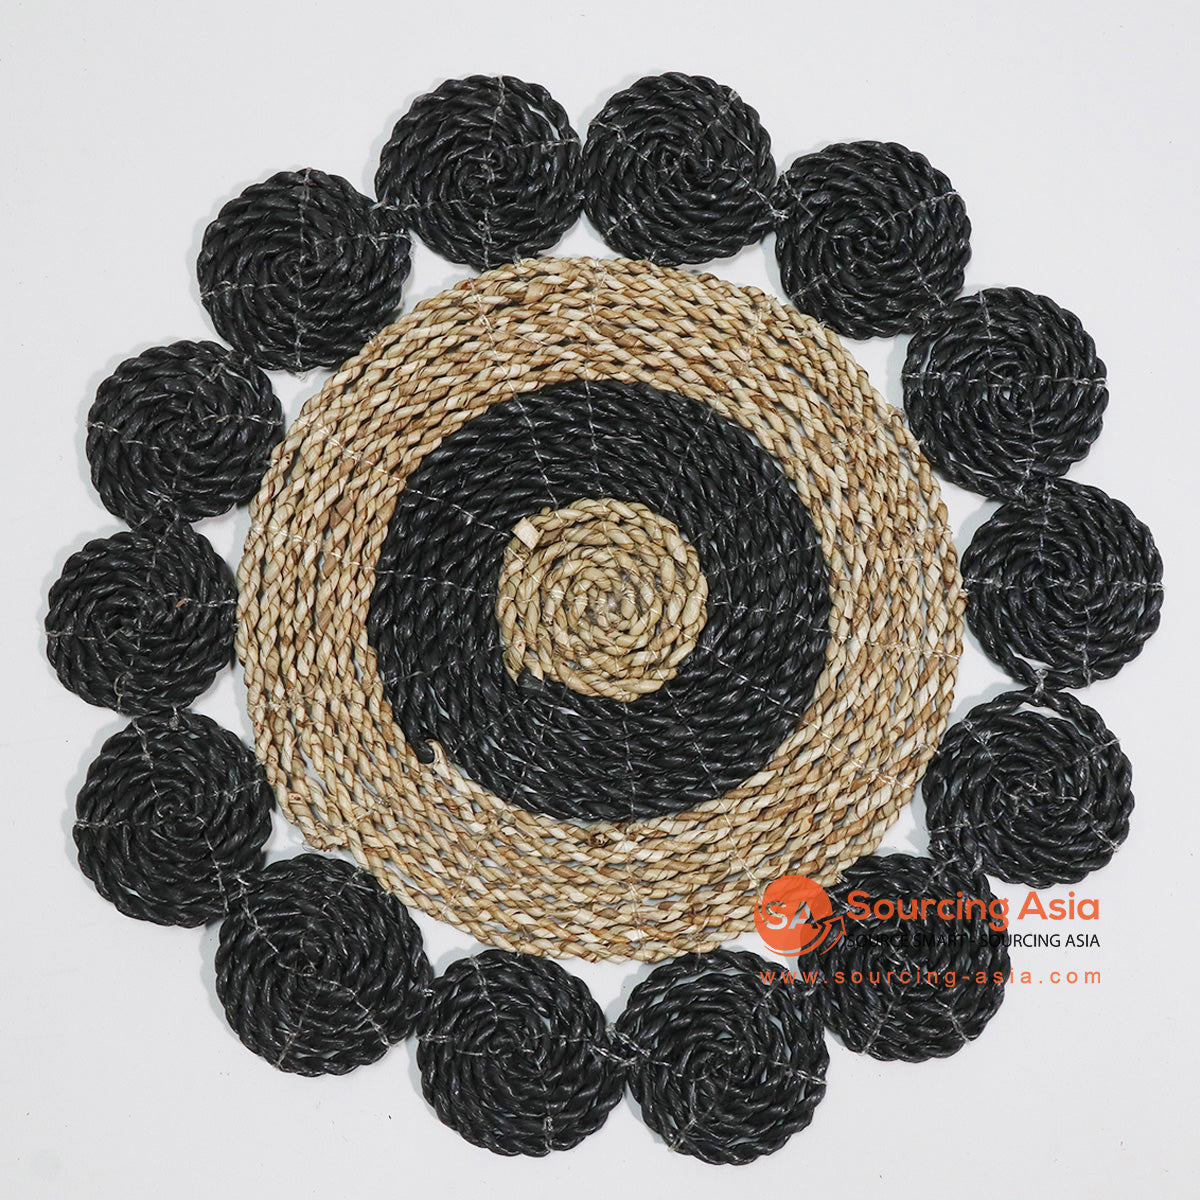 HBSC013-6 NATURAL AND BLACK SEA GRASS DECORATIVE PLACEMAT